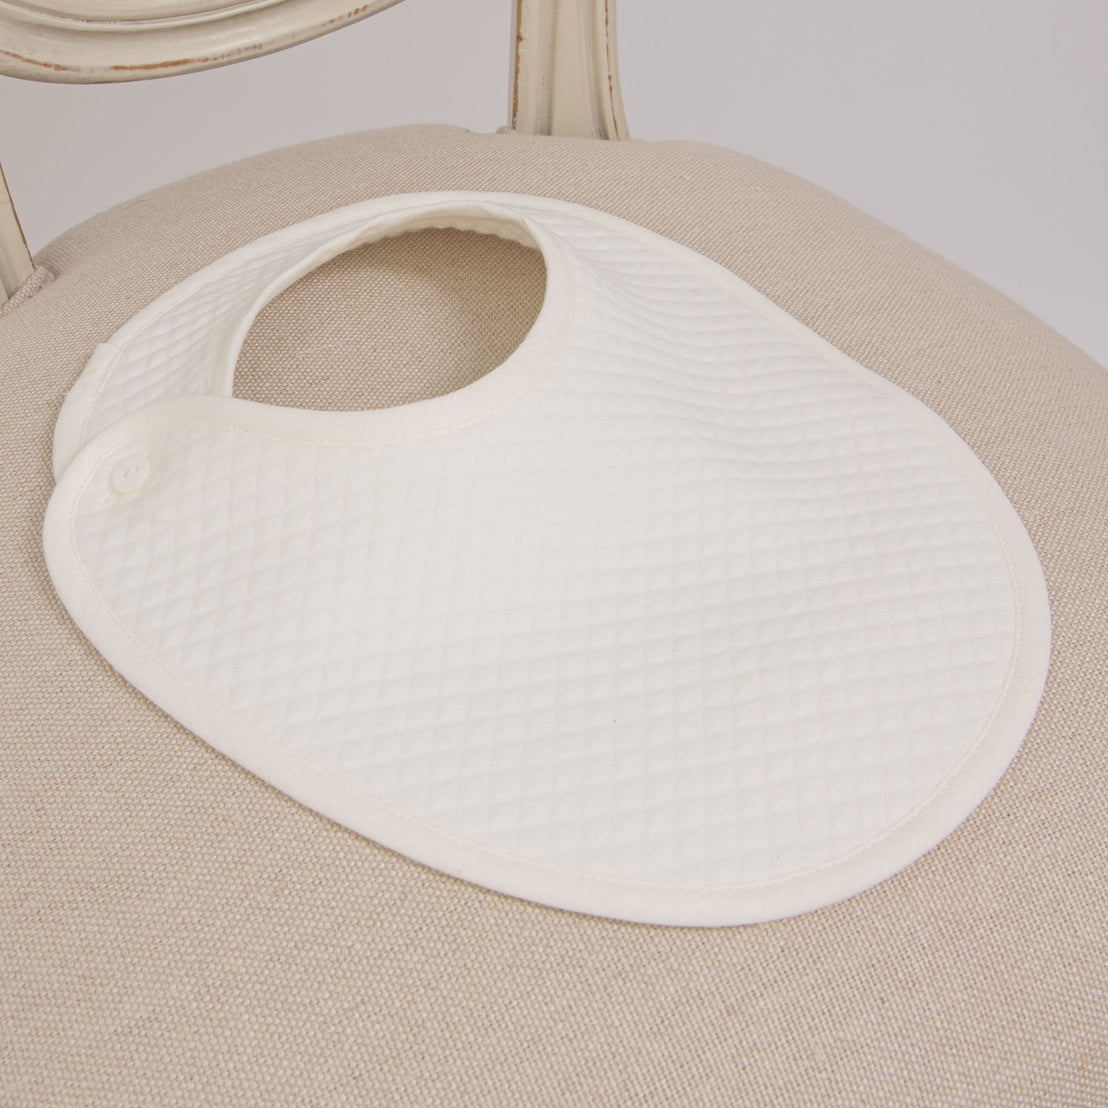 The Owen Bib crafted from ivory quilted cotton and a single button closure placed neatly on a vintage light beige upholstered chair.